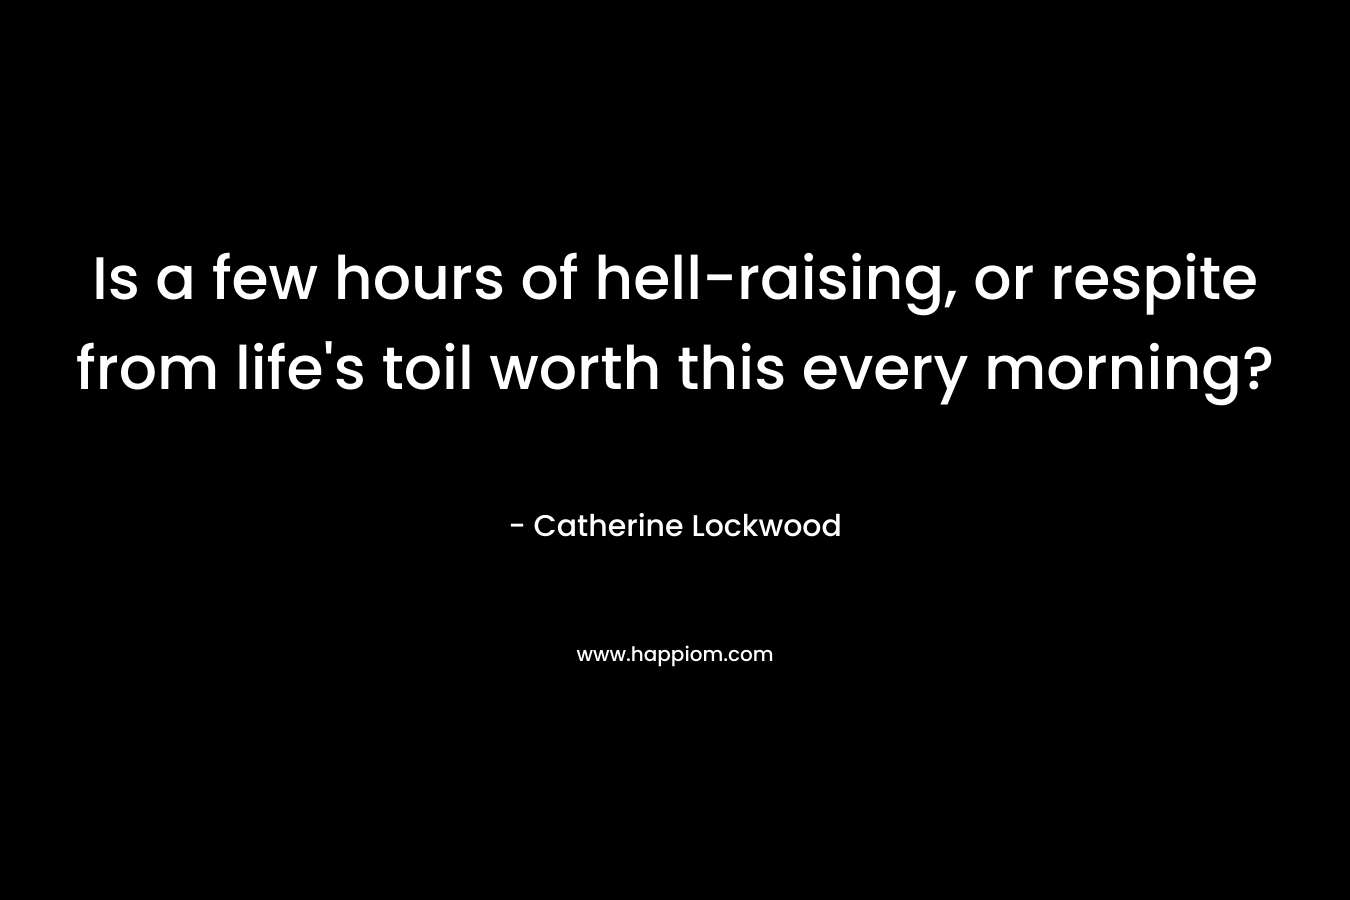 Is a few hours of hell-raising, or respite from life’s toil worth this every morning? – Catherine Lockwood